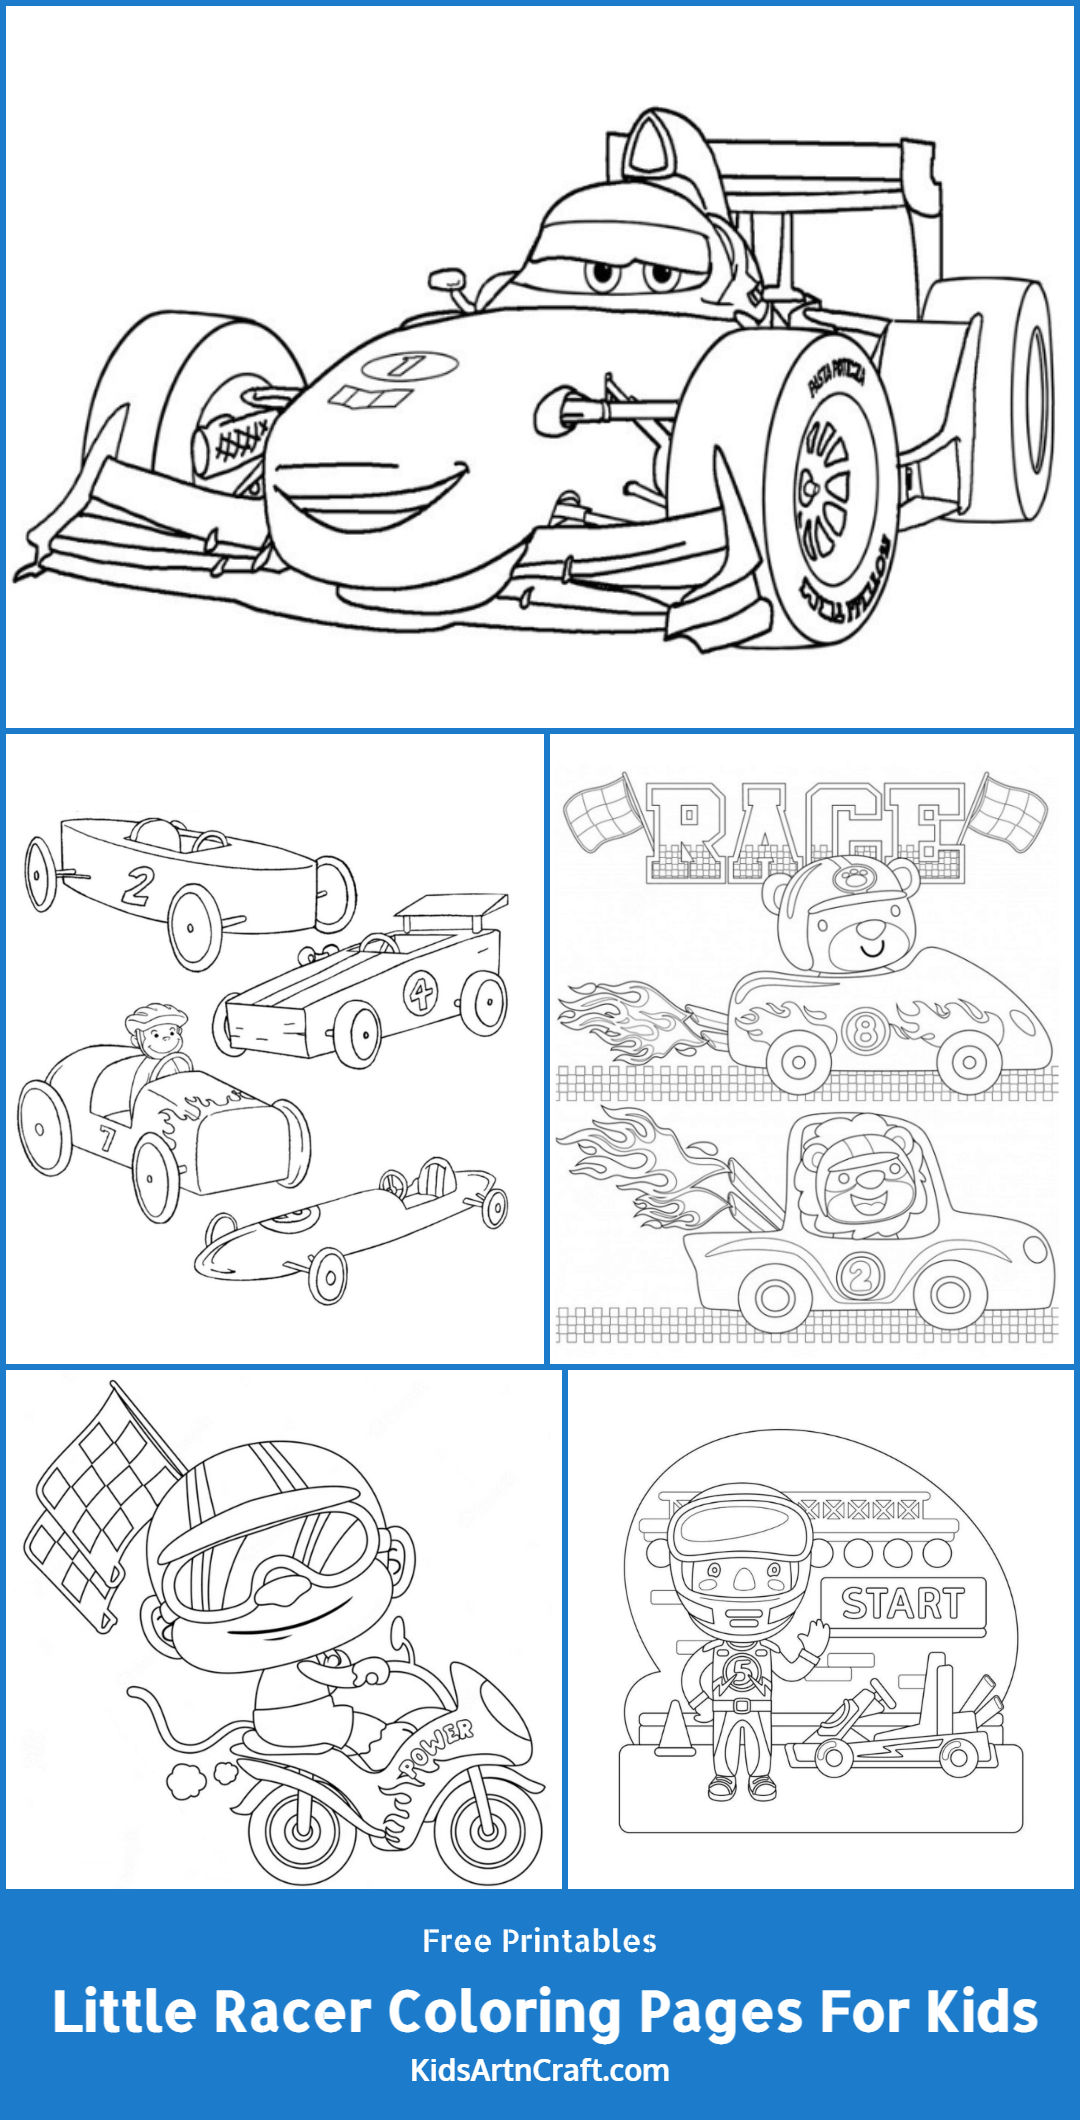 Little Racer Coloring Pages For Kids – Free Printables